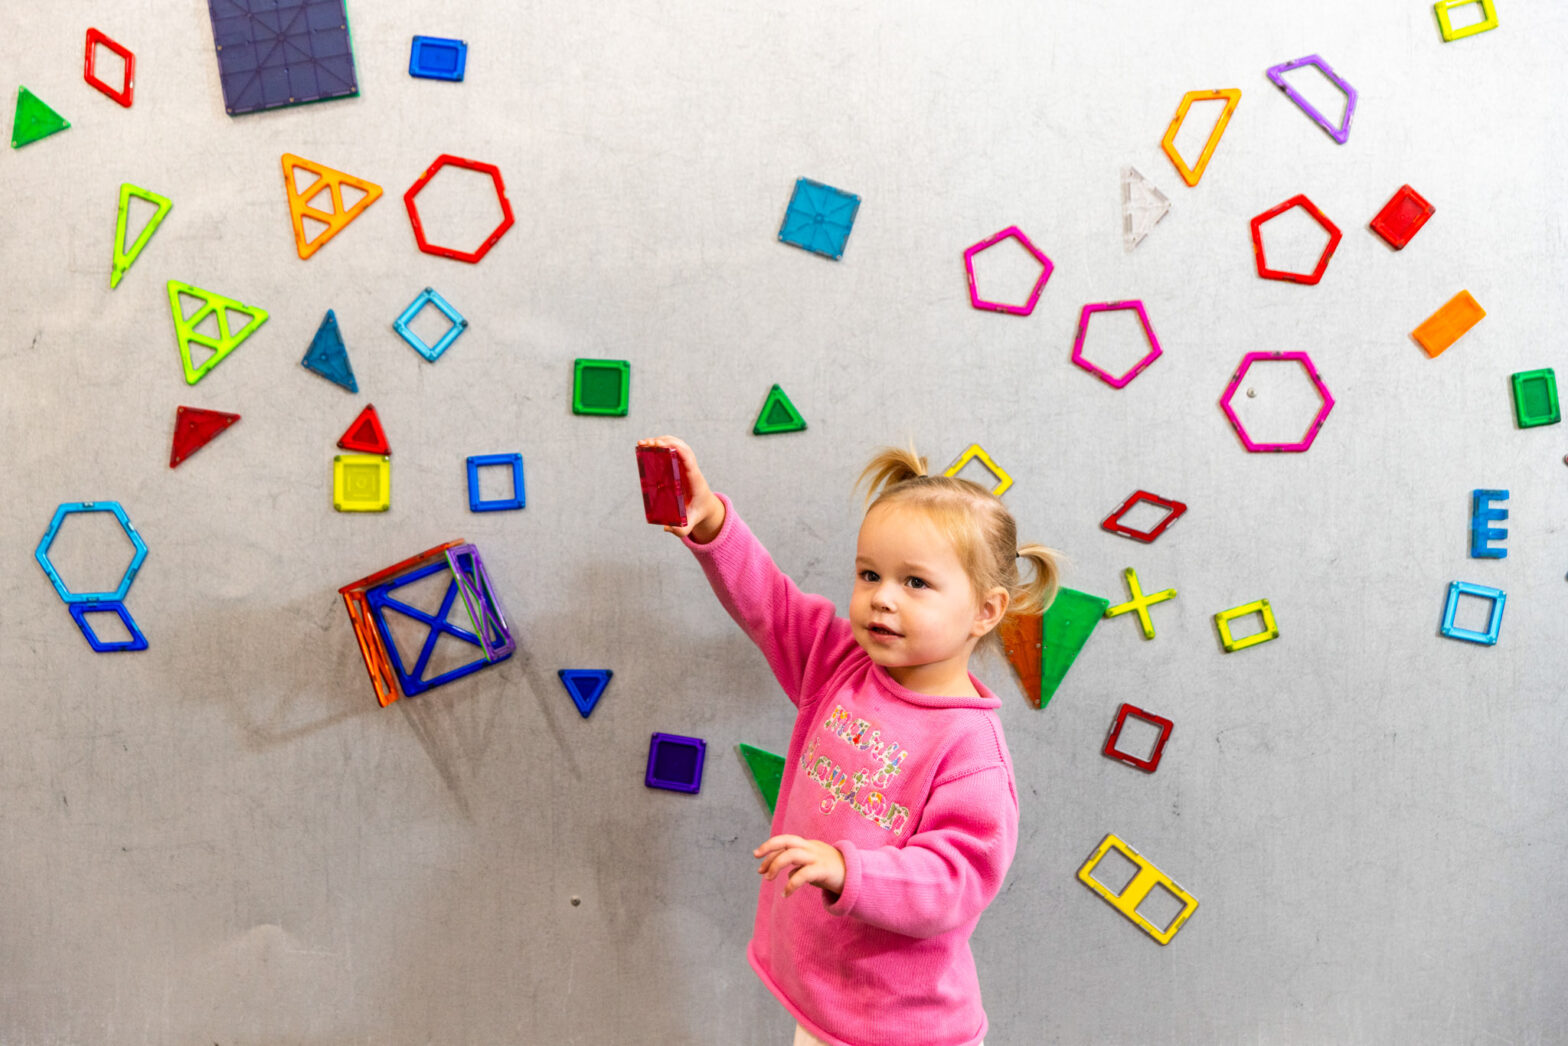 A little girl playing with shapes at the magnet wall